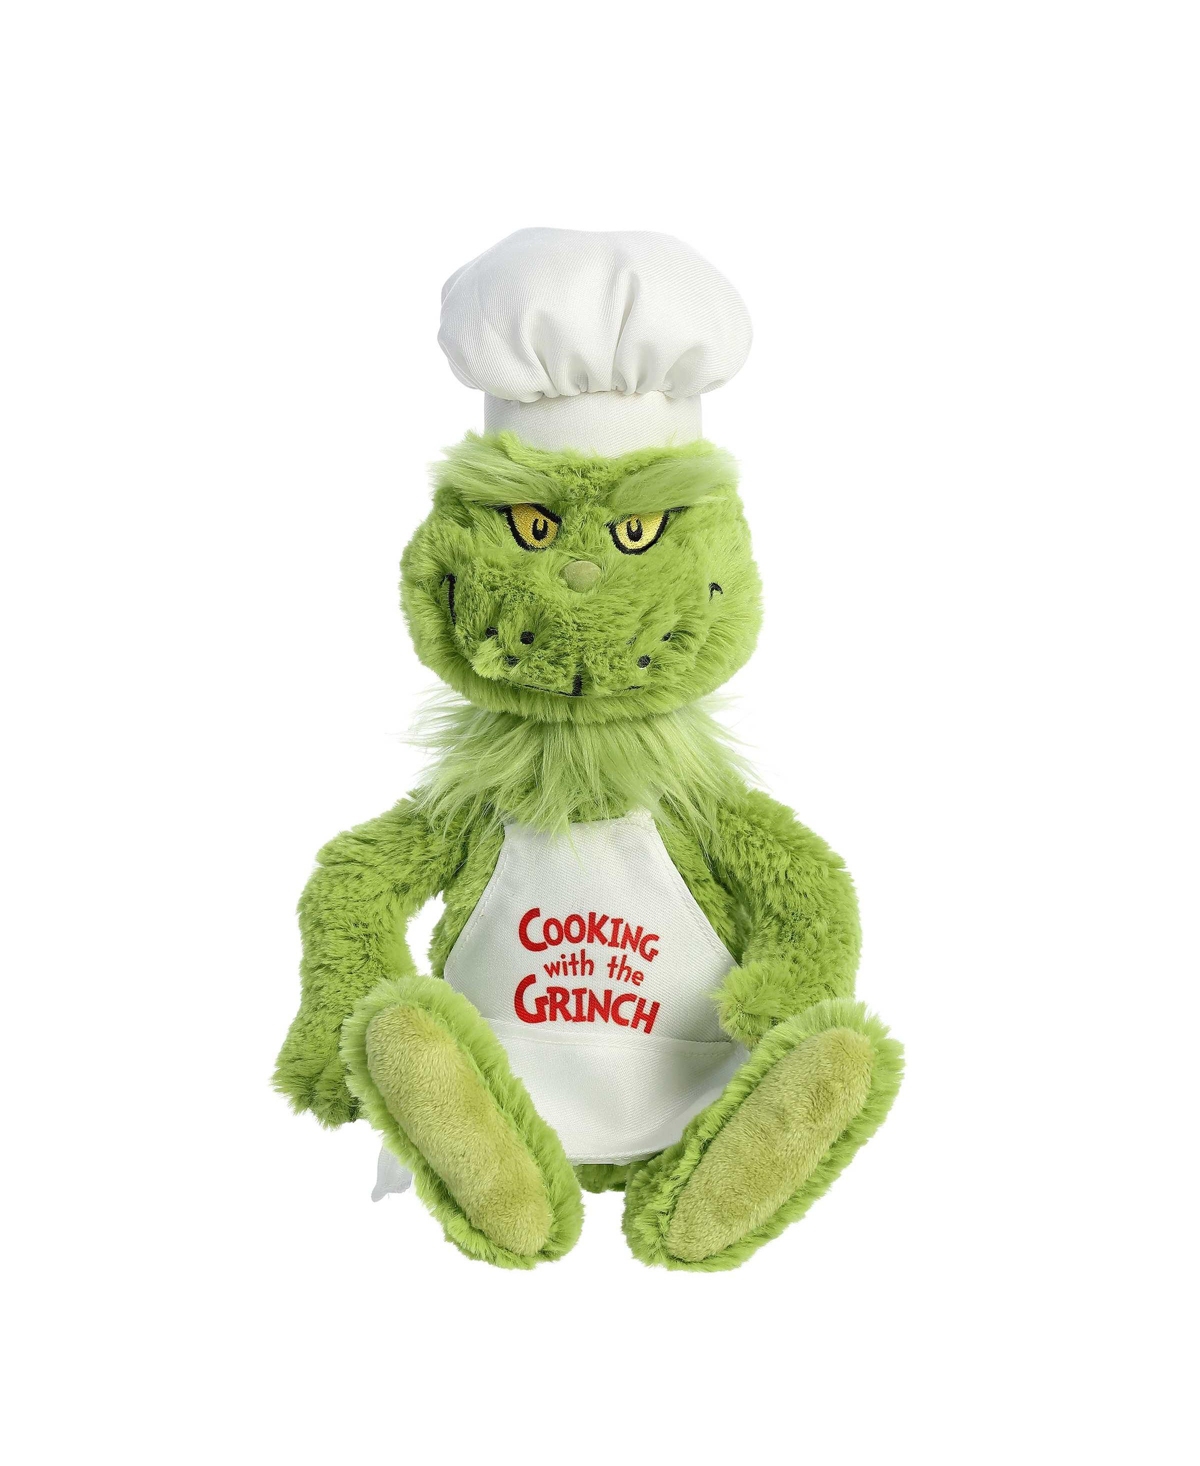 Aurora Kids' Large Chef Grinch Dr. Seuss Whimsical Plush Toy Green 14"